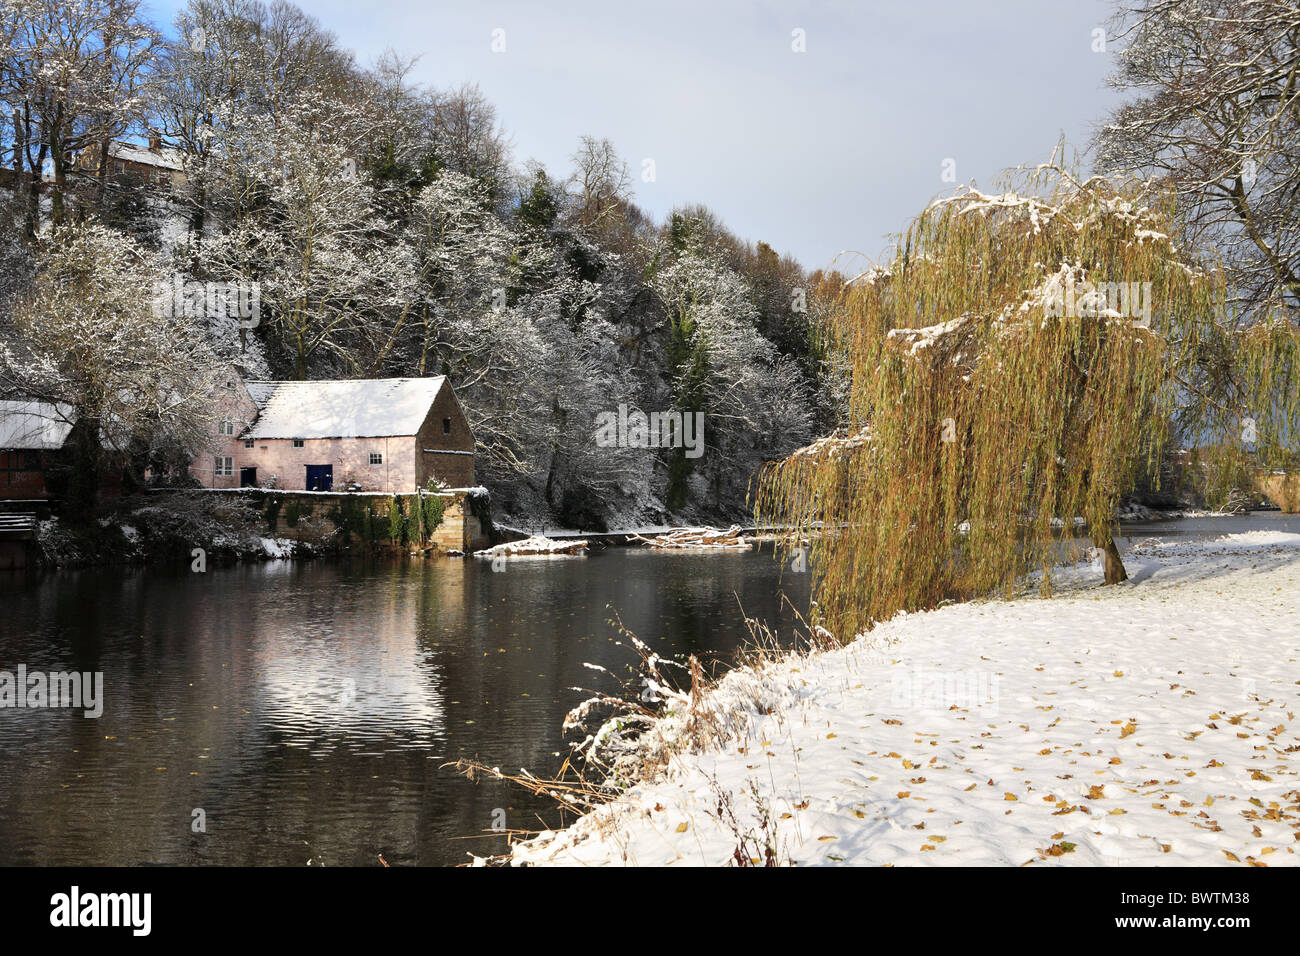 The mill house and weir over the river Wear, Durham, England, UK Stock Photo